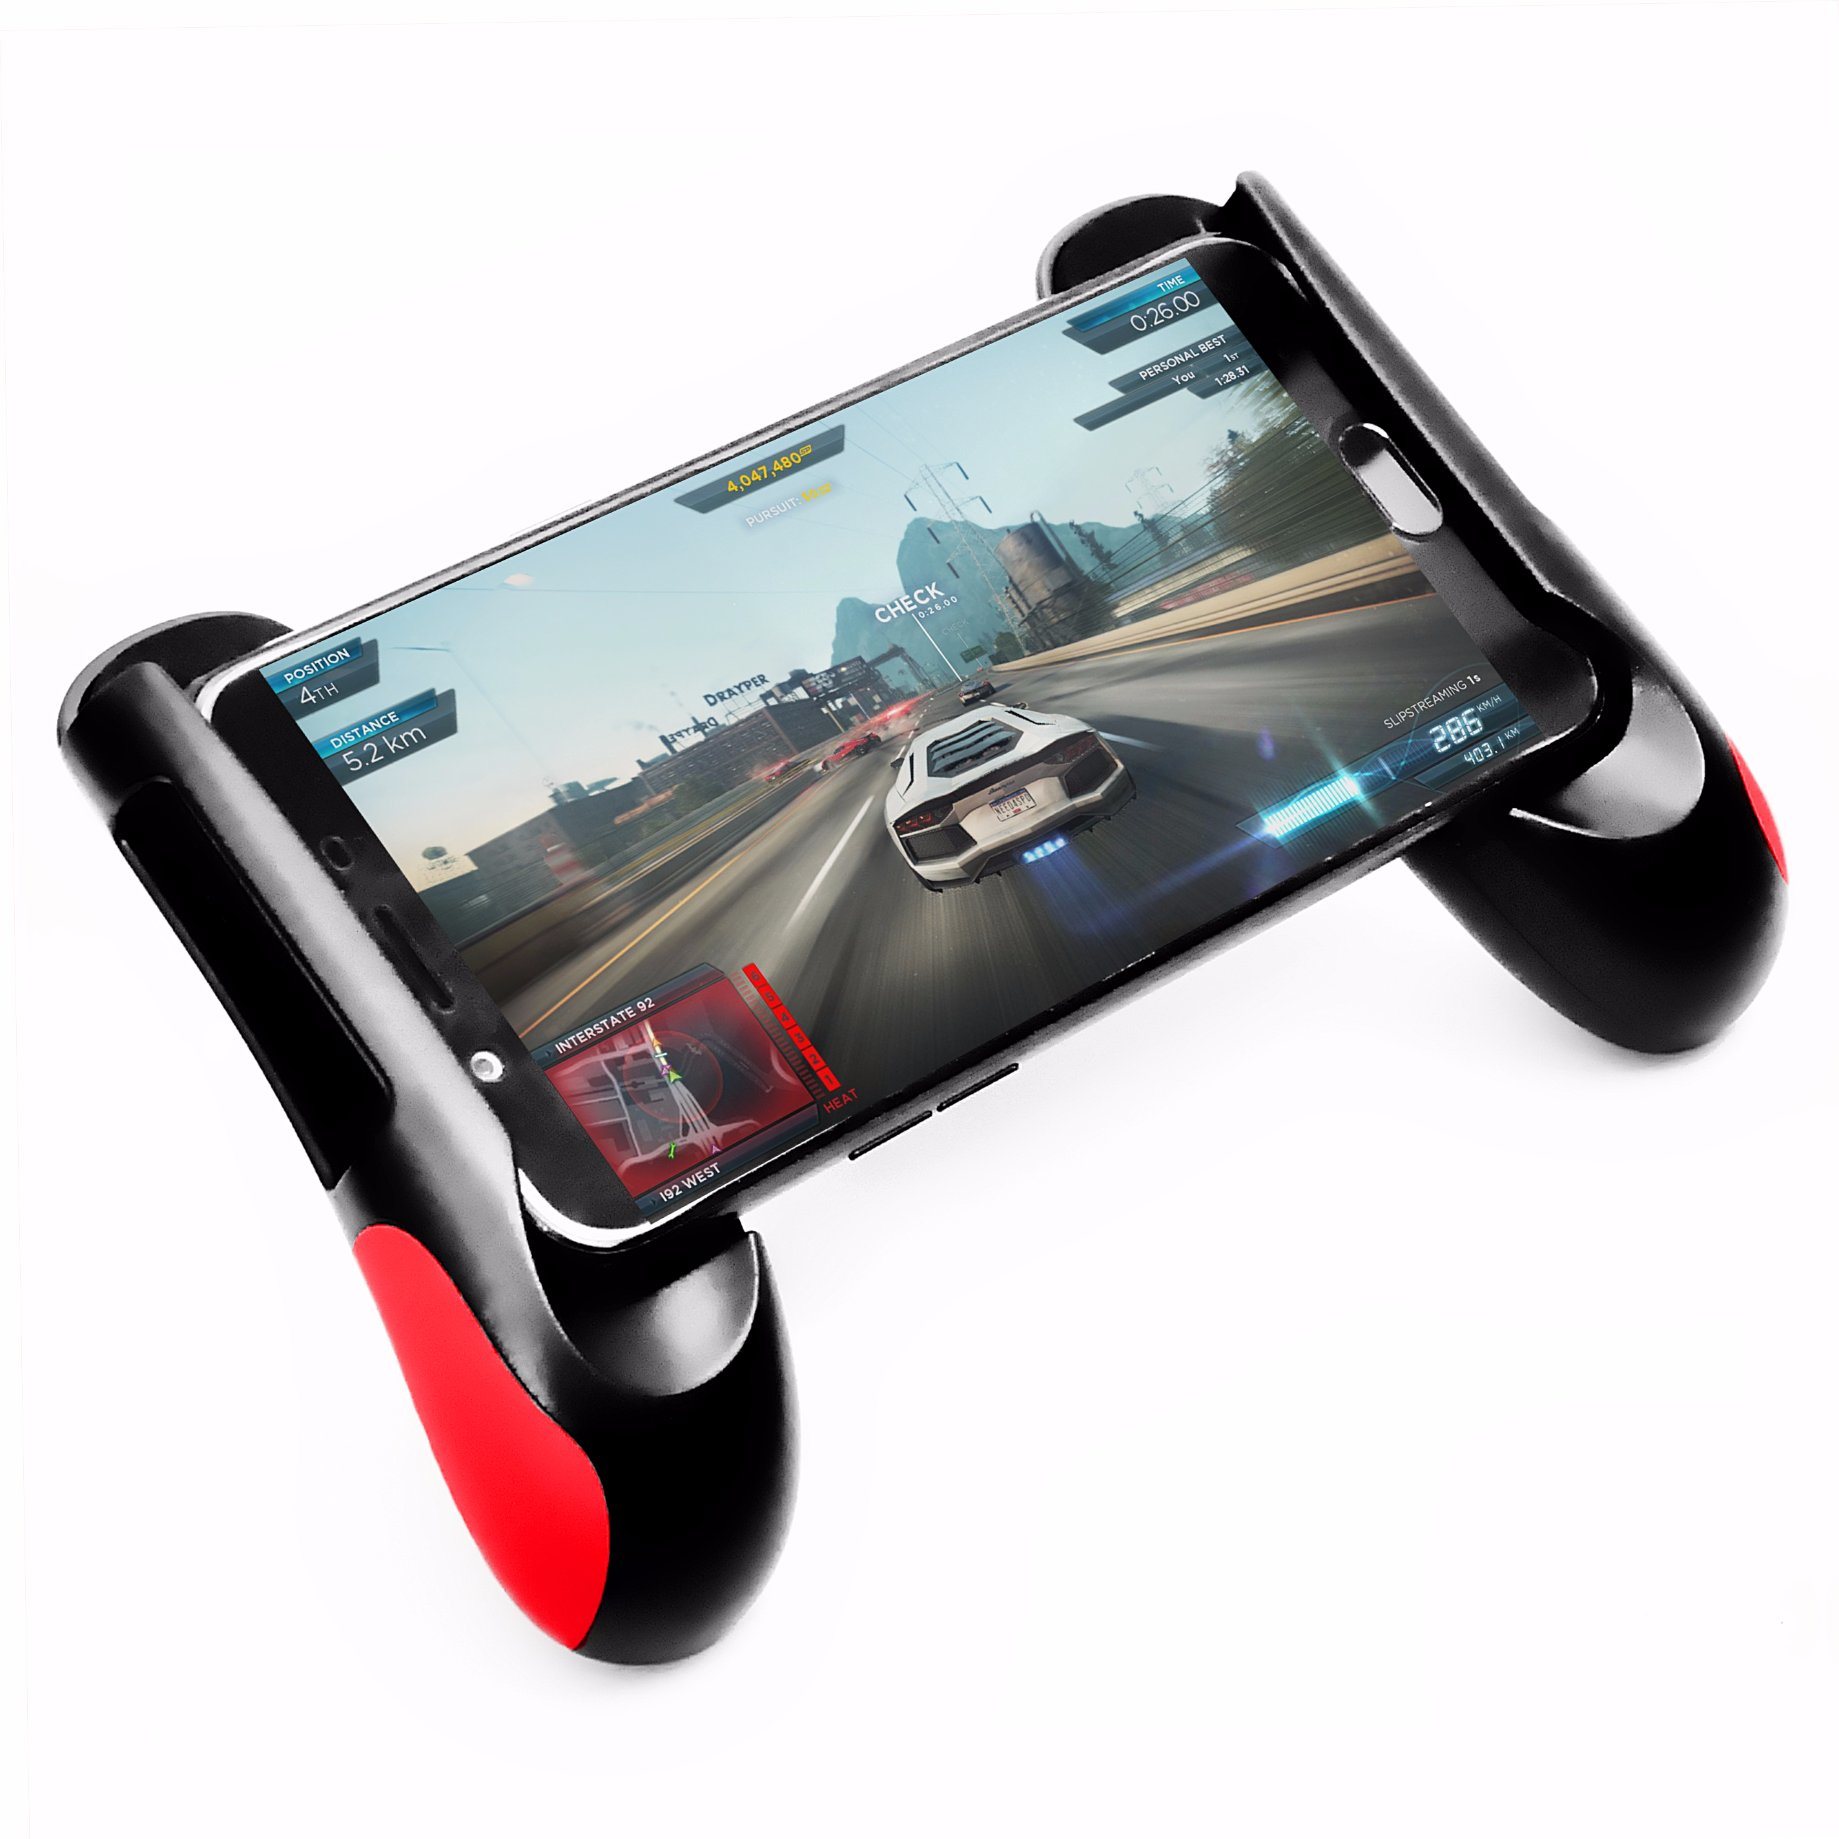 /proimages/2f0j00rdlTNqgyQJkO/new-style-phone-stand-for-smartphone-playing-games-with-grip.jpg